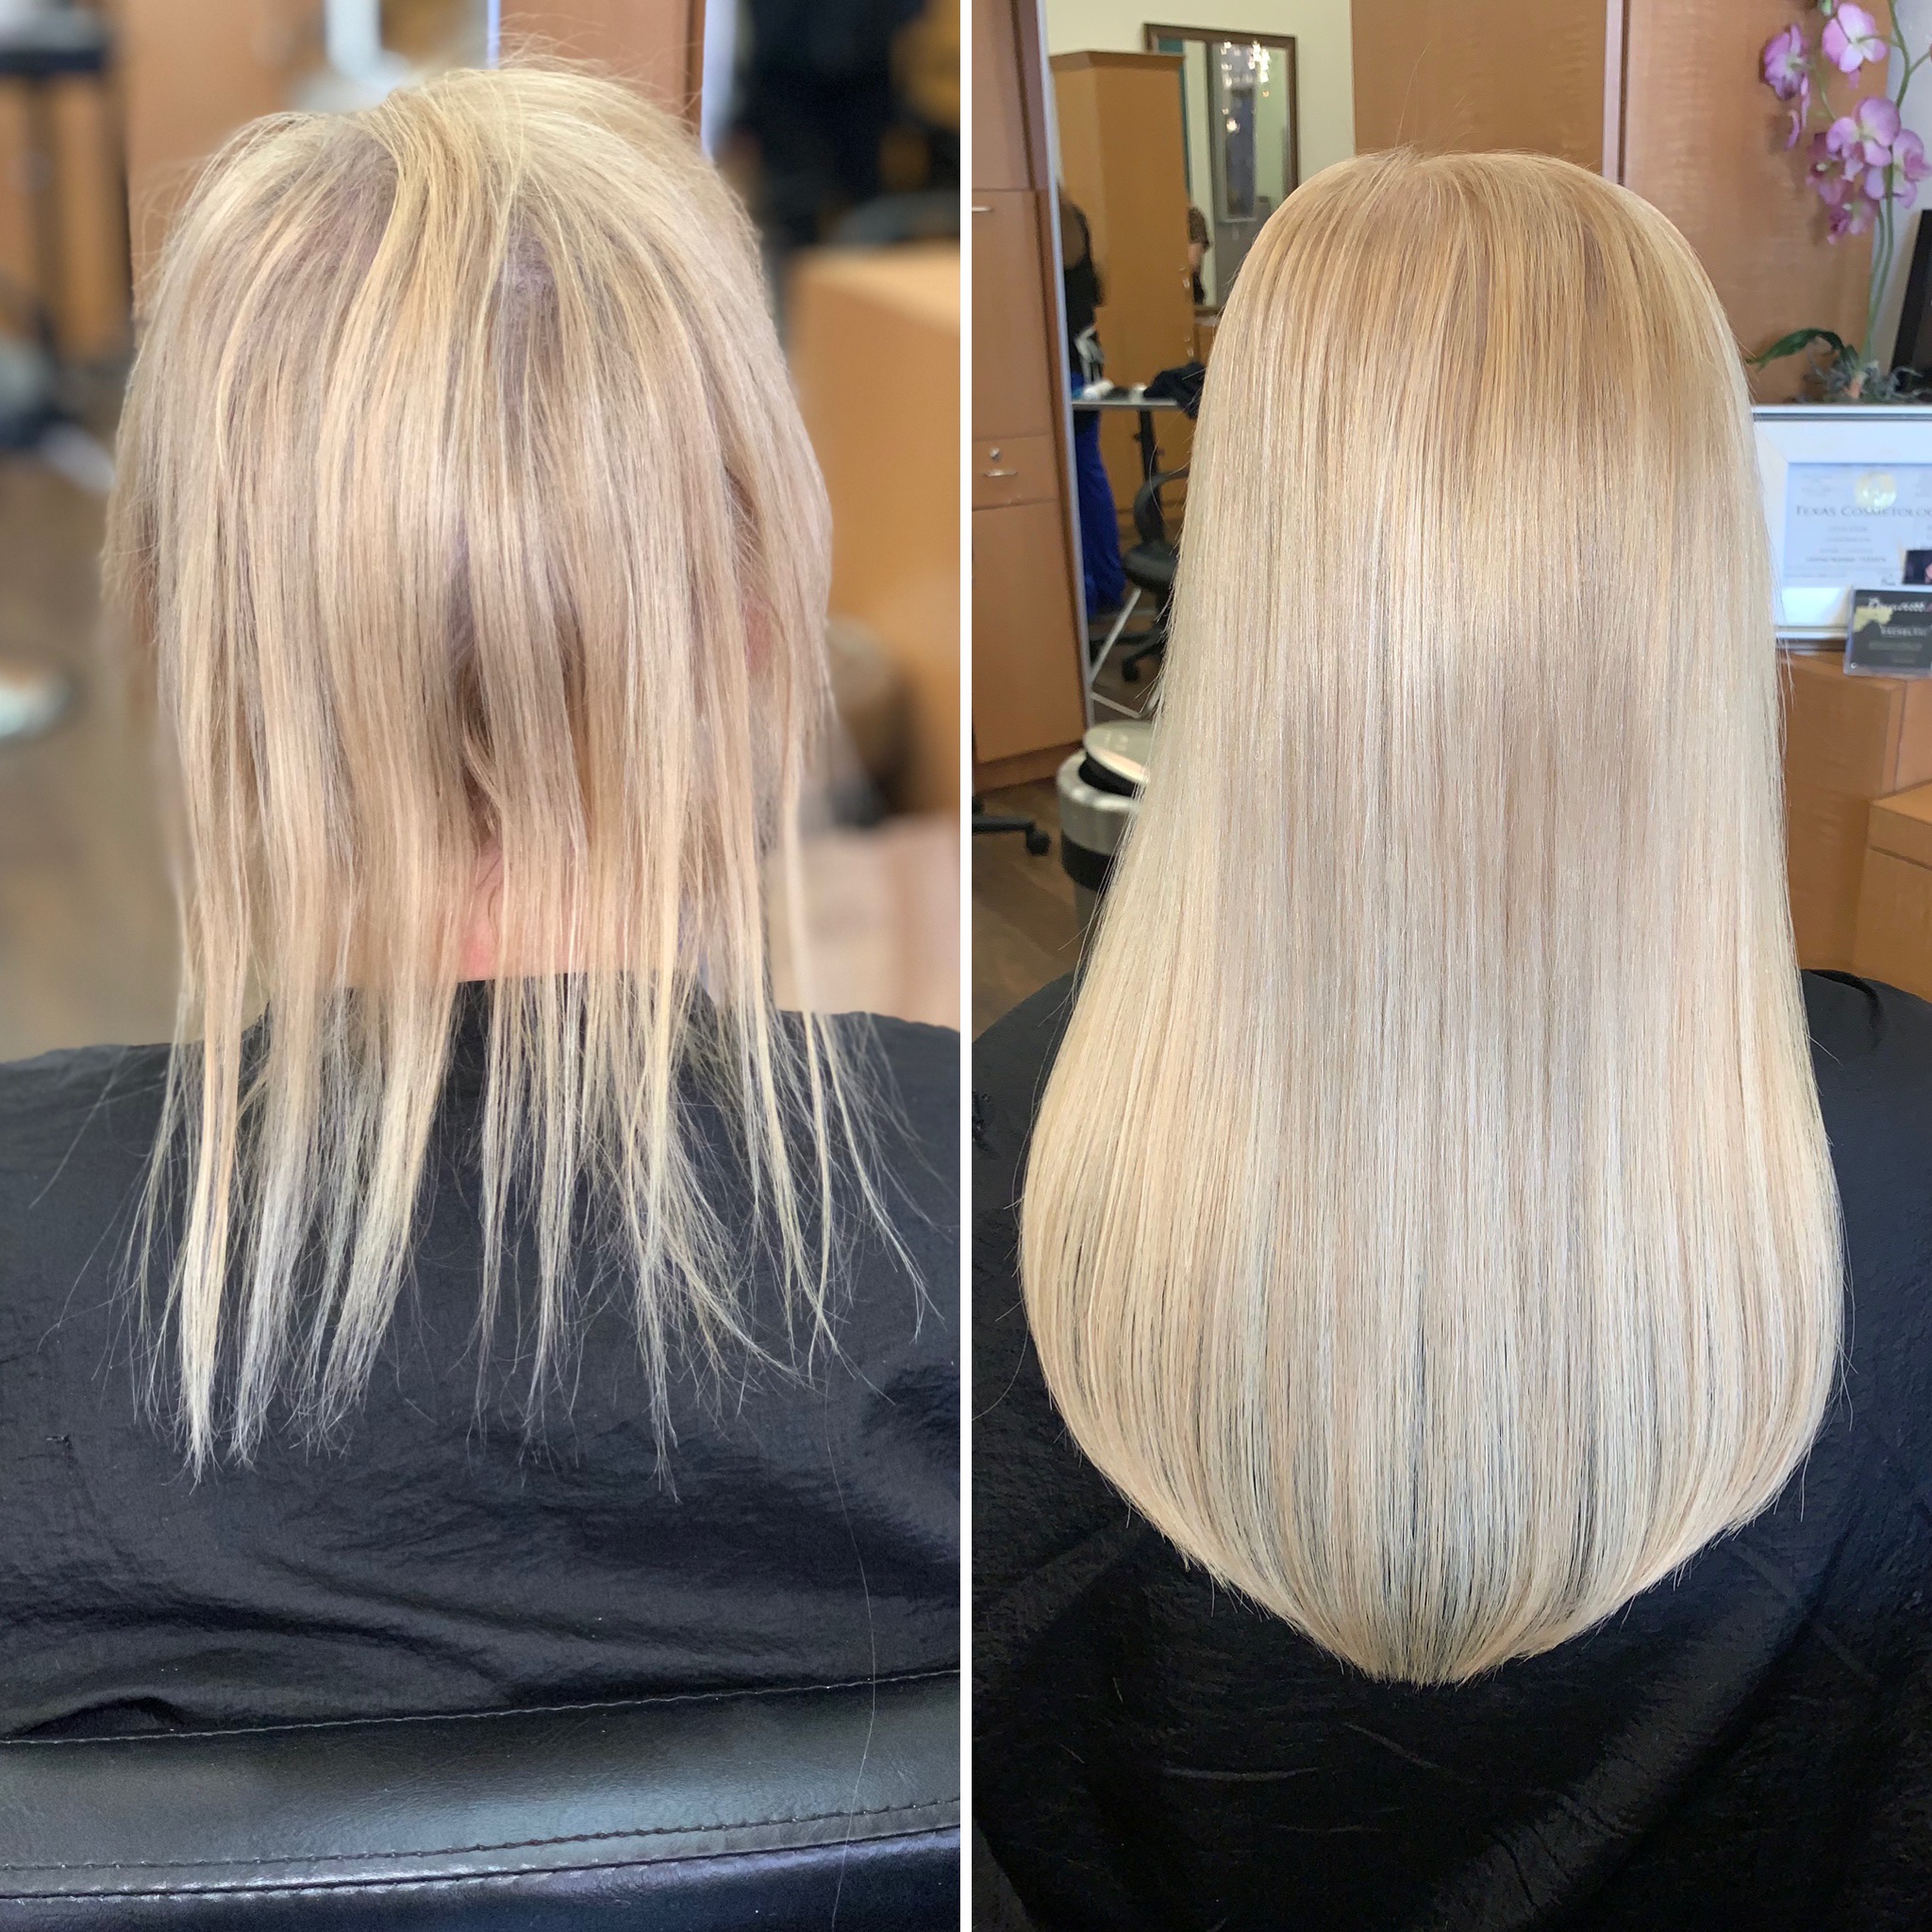 28 Hair Products With Great Before-And-After Photos